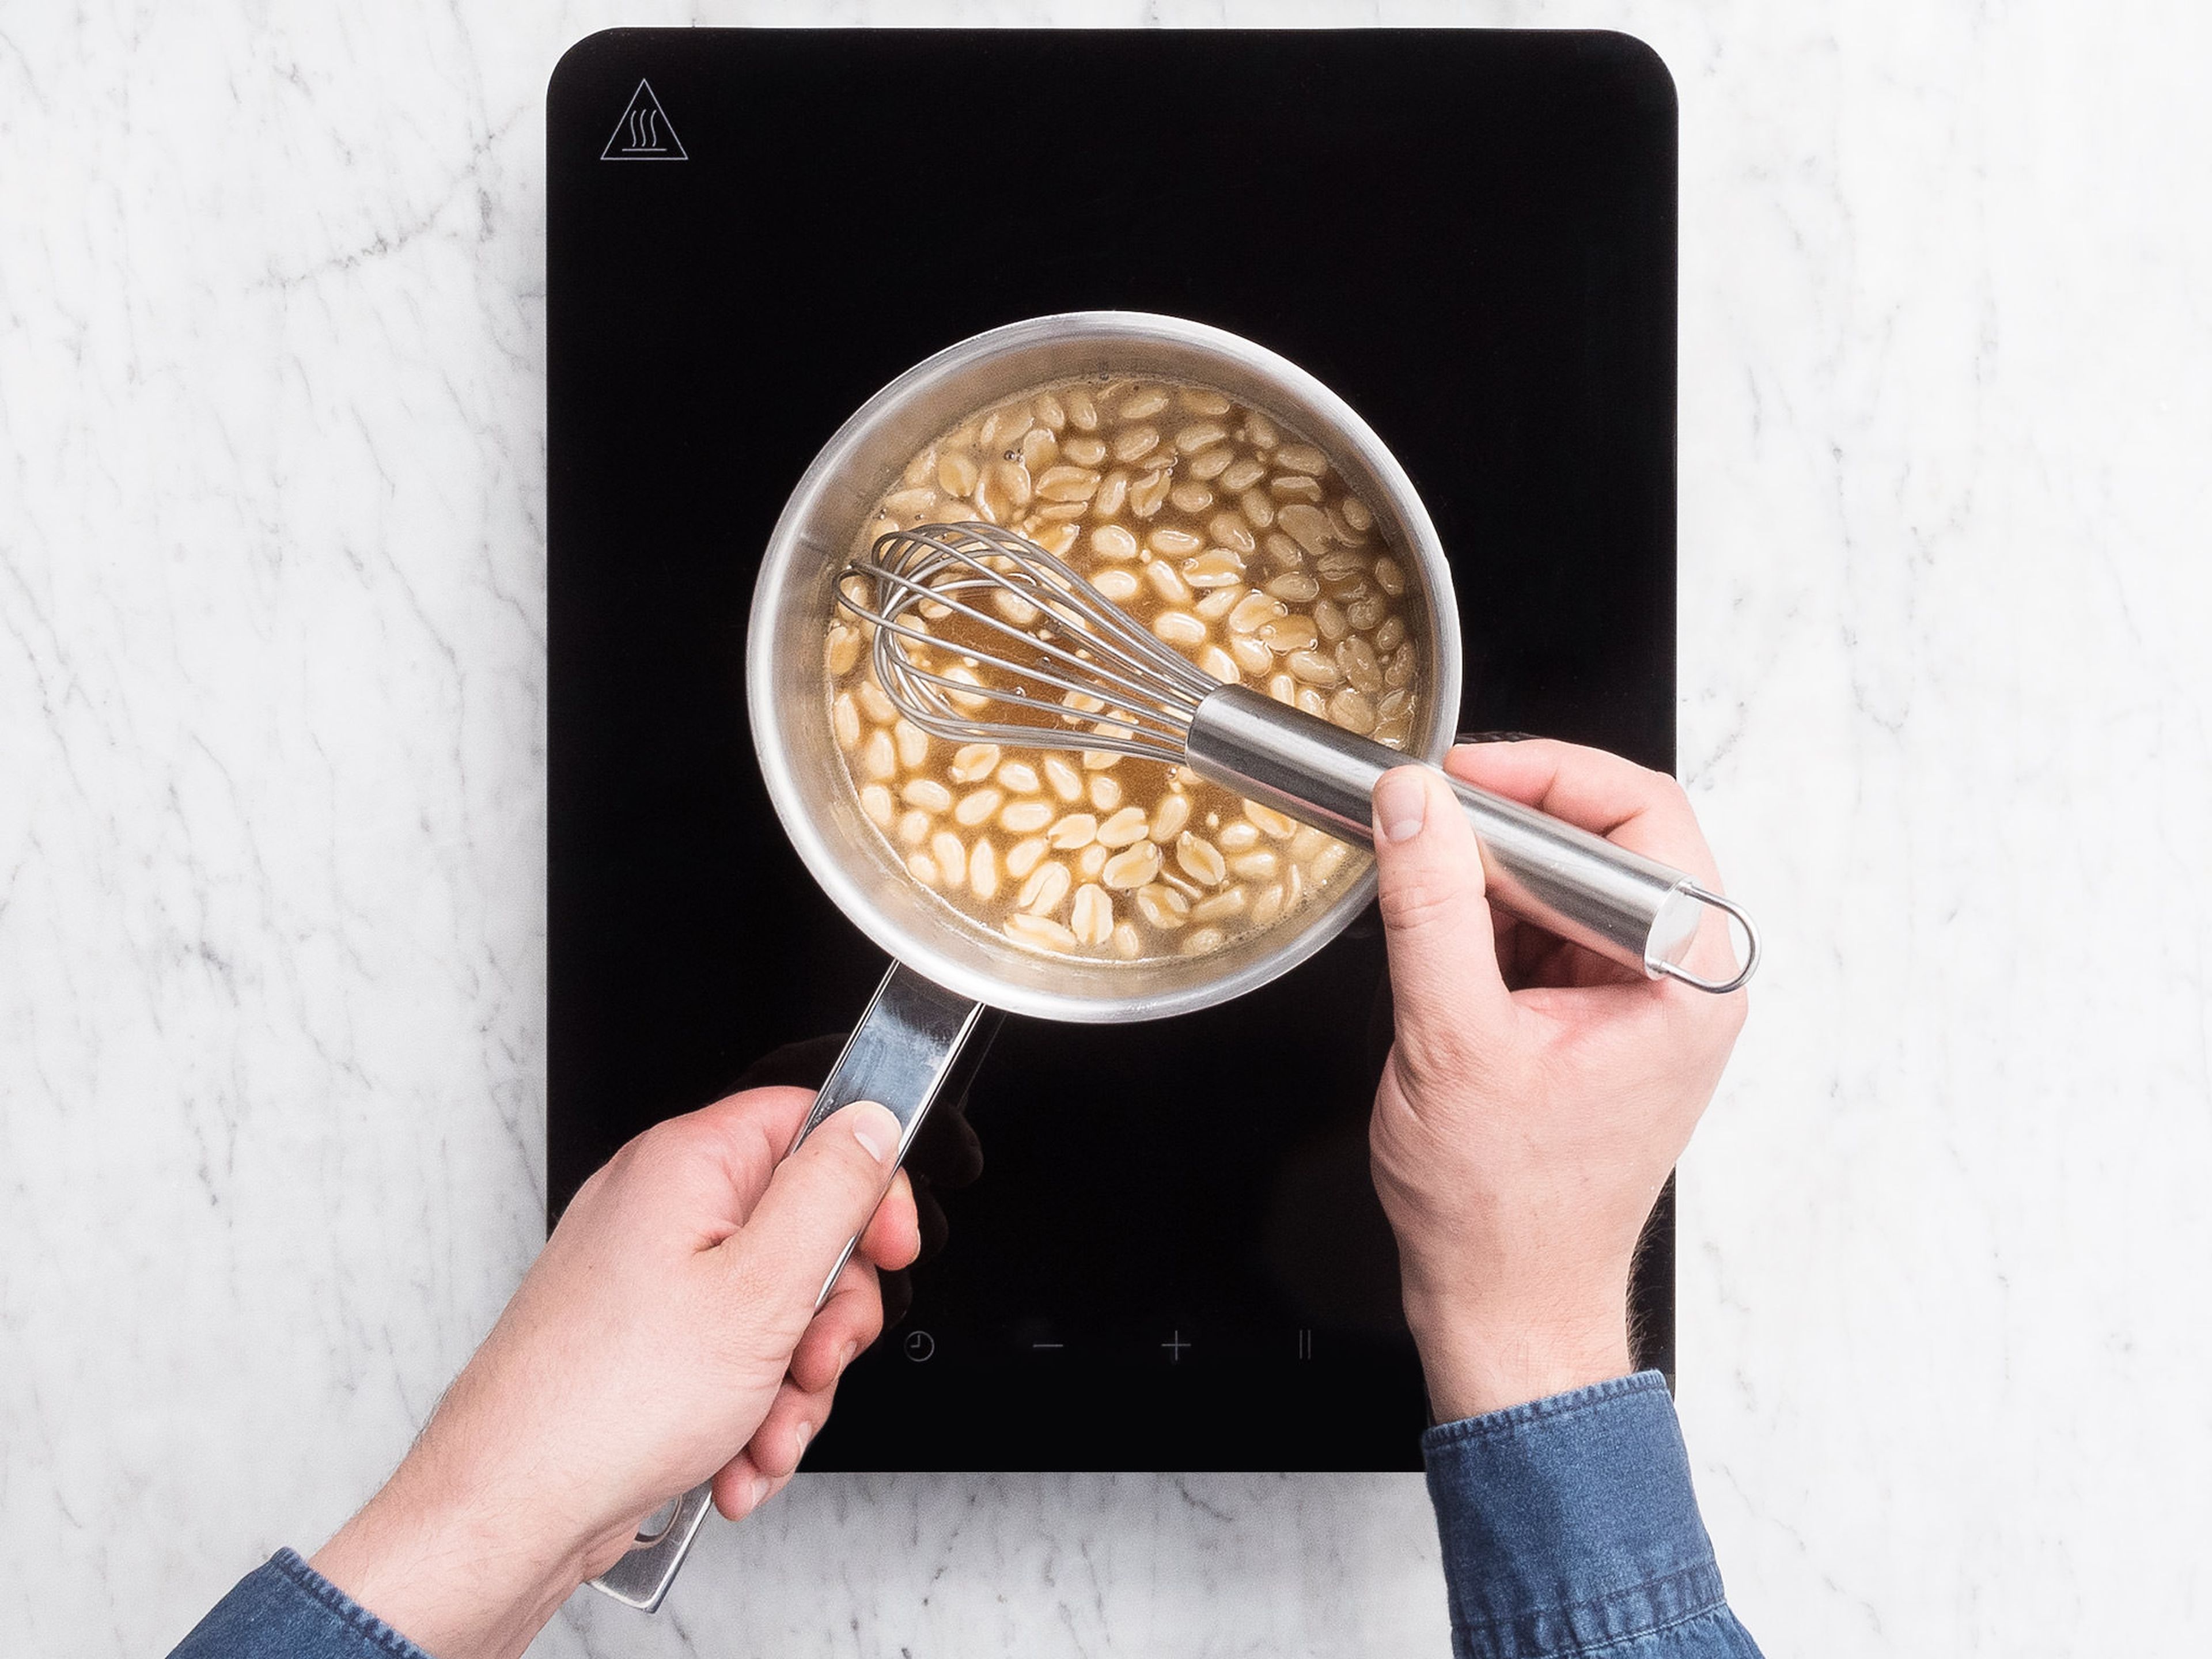 To make the honey caramel, place the remaining butter, honey, and salt to a pot over medium heat. Bring to a boil while whisking. Reduce heat to low and let simmer for approx. 10 min. until thickened. Remove from heat, stir in the roasted peanuts and let cool to room temperature.